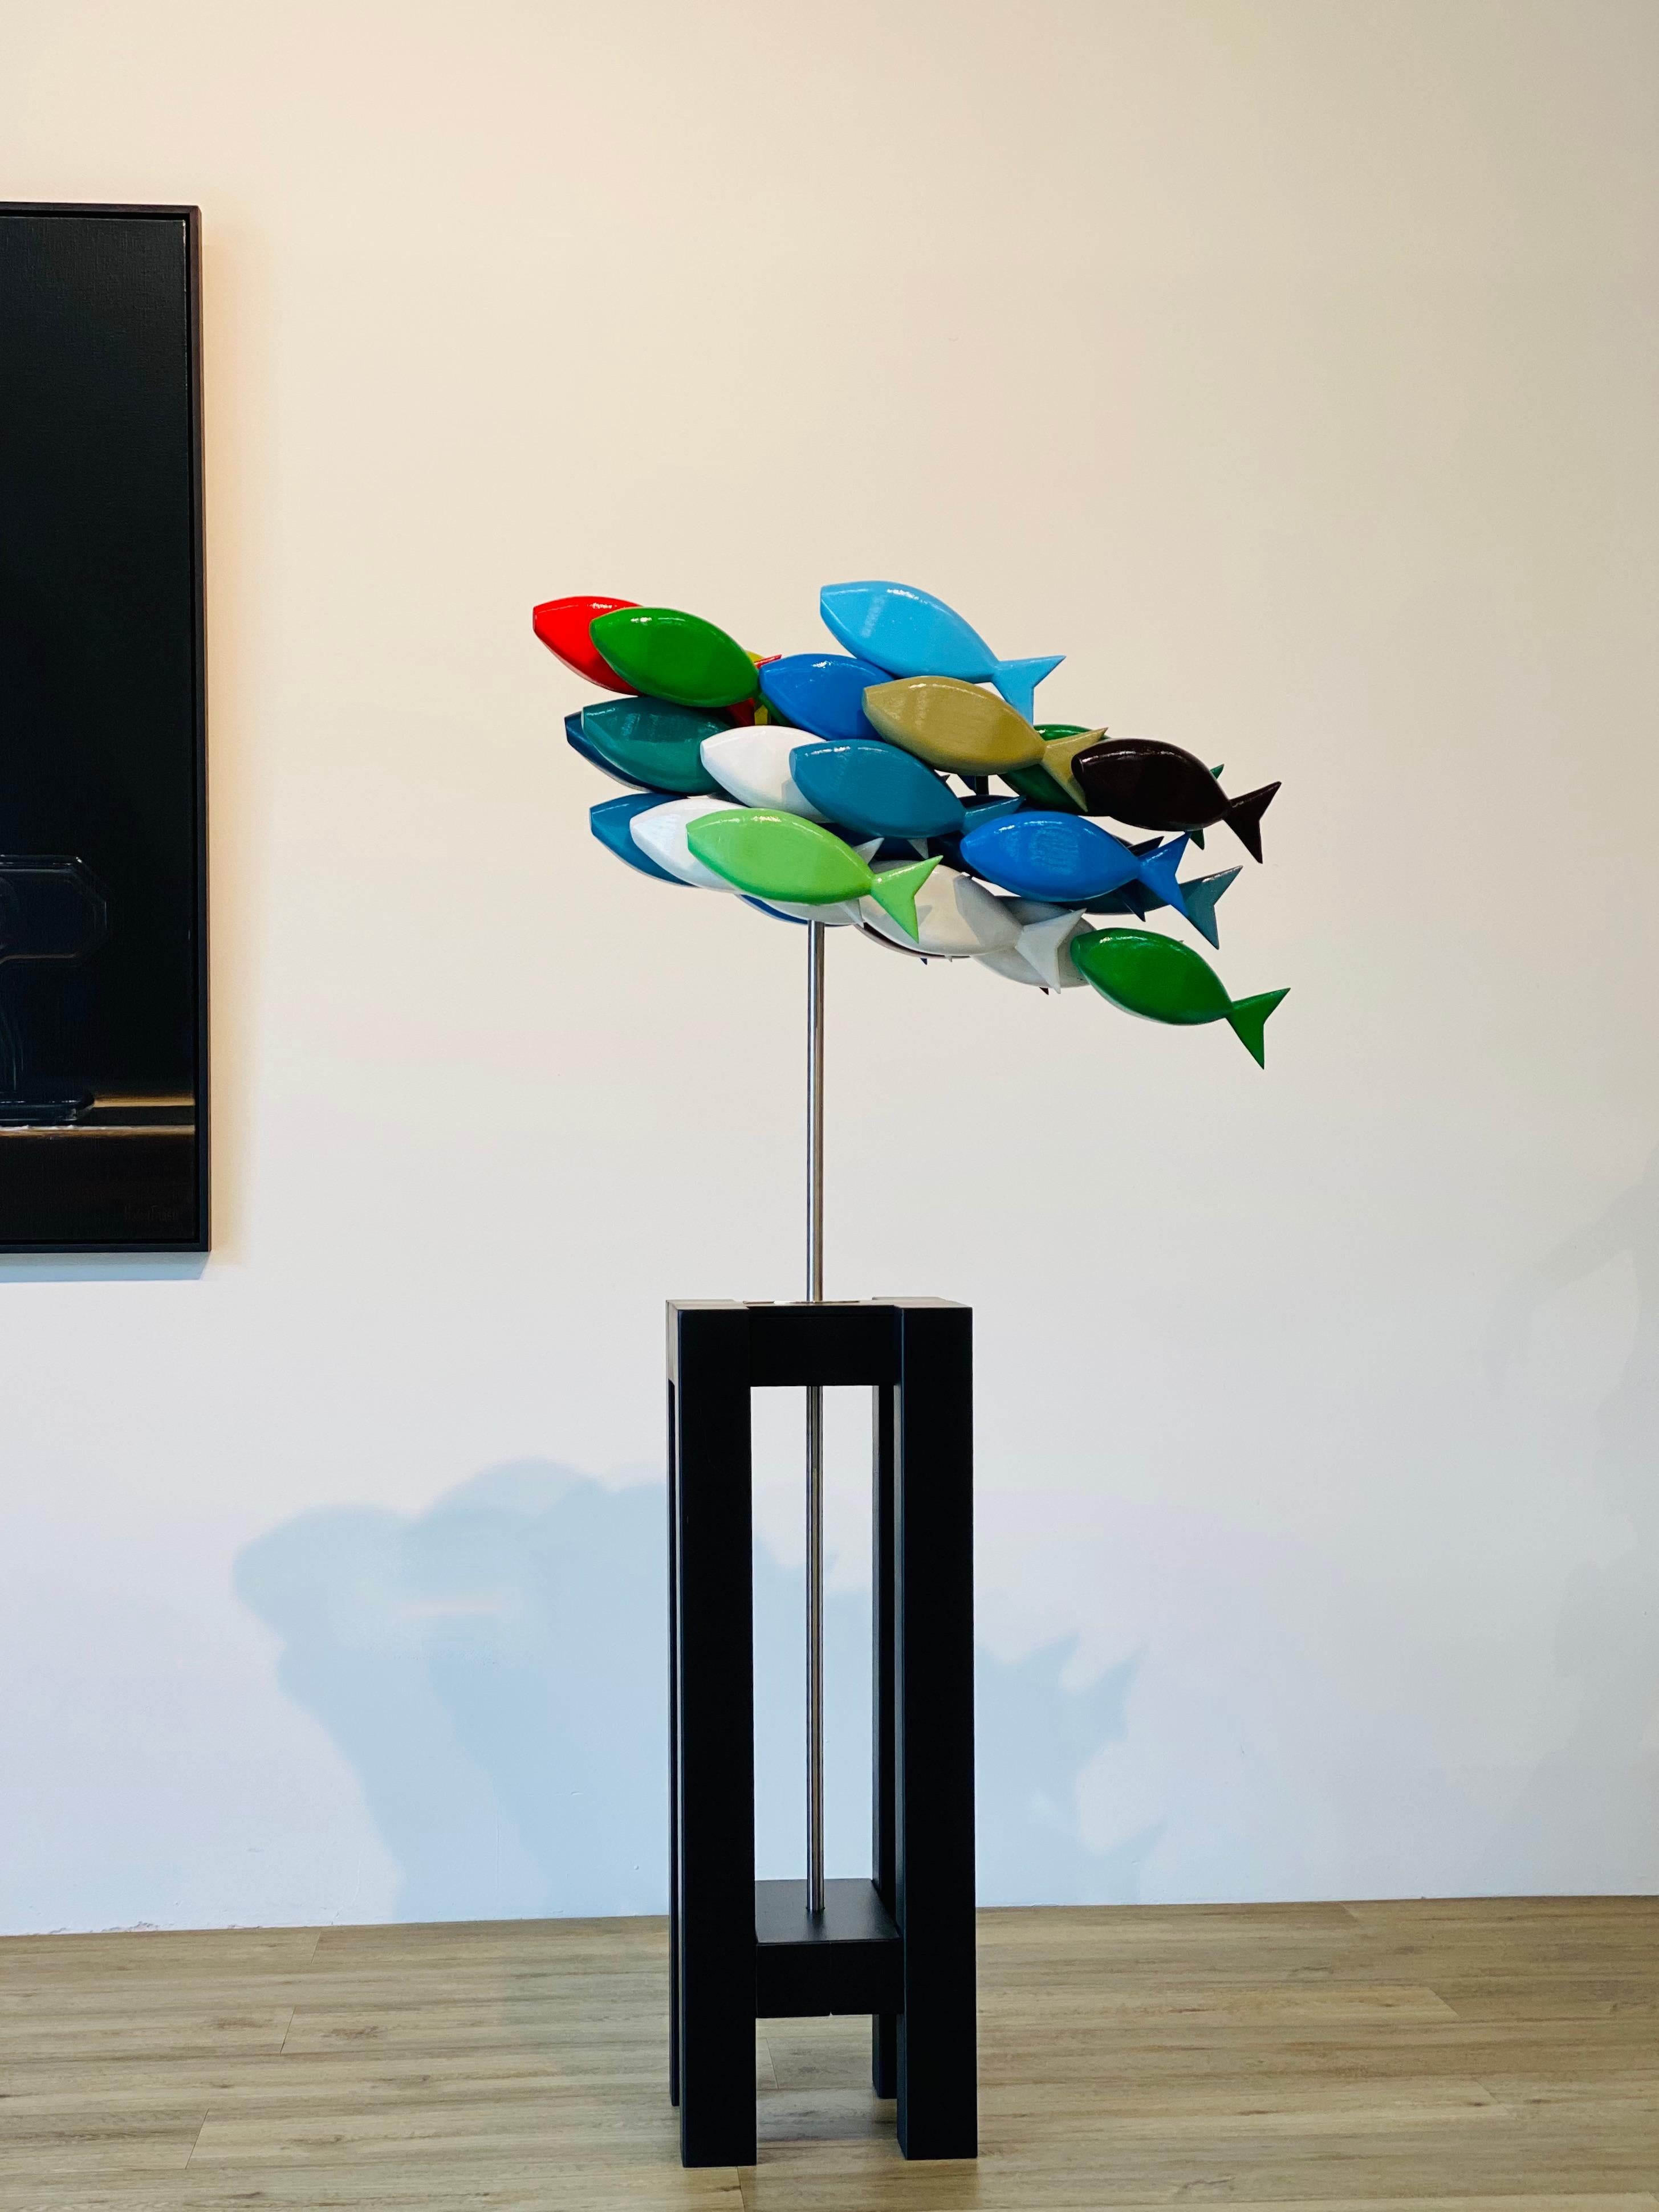 Jos de Wit Abstract Sculpture - School of Fish- 21st Century Contemporary Wooden Colorful Sculpture of Fish